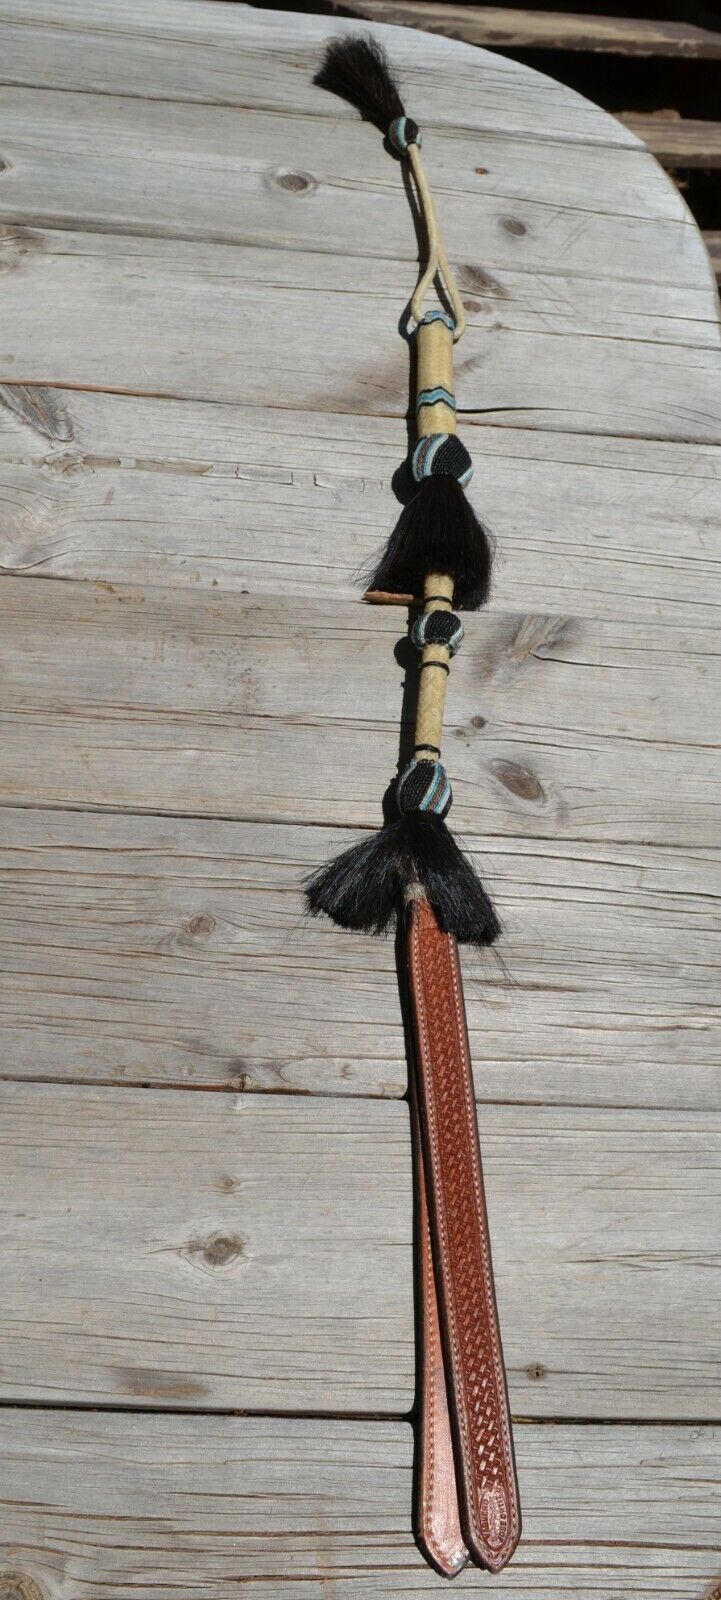 Beautiful Jose Ortiz  Braided Rawhide Quirt Whip with Hitched Horsehair Knots, black horsehair tassels and Hand Tooled Leather Popper.   Natural colored rawhide with turquoise blue, tan and black details. 